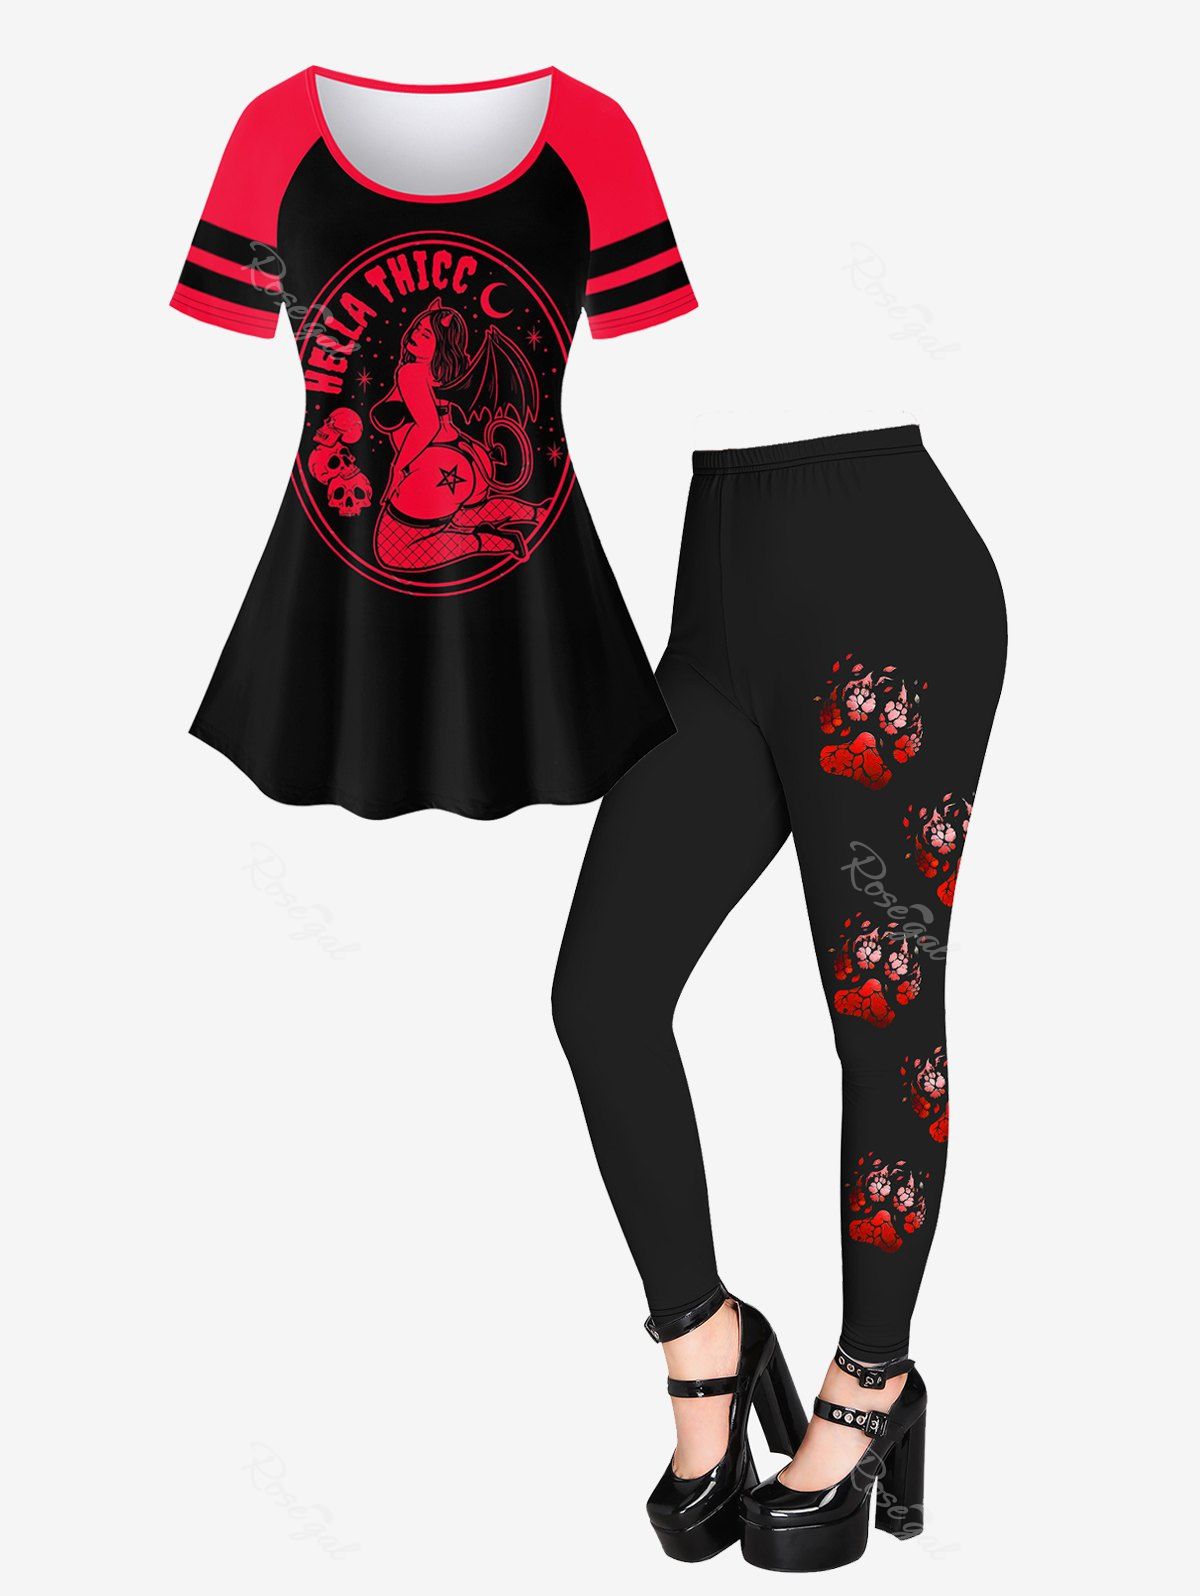 Unique Gothic Raglan Sleeves Skulls Beauty Letters Printed Graphic Tee And Gothic Cat Paws Print Skinny Leggings Gothic Outfit  